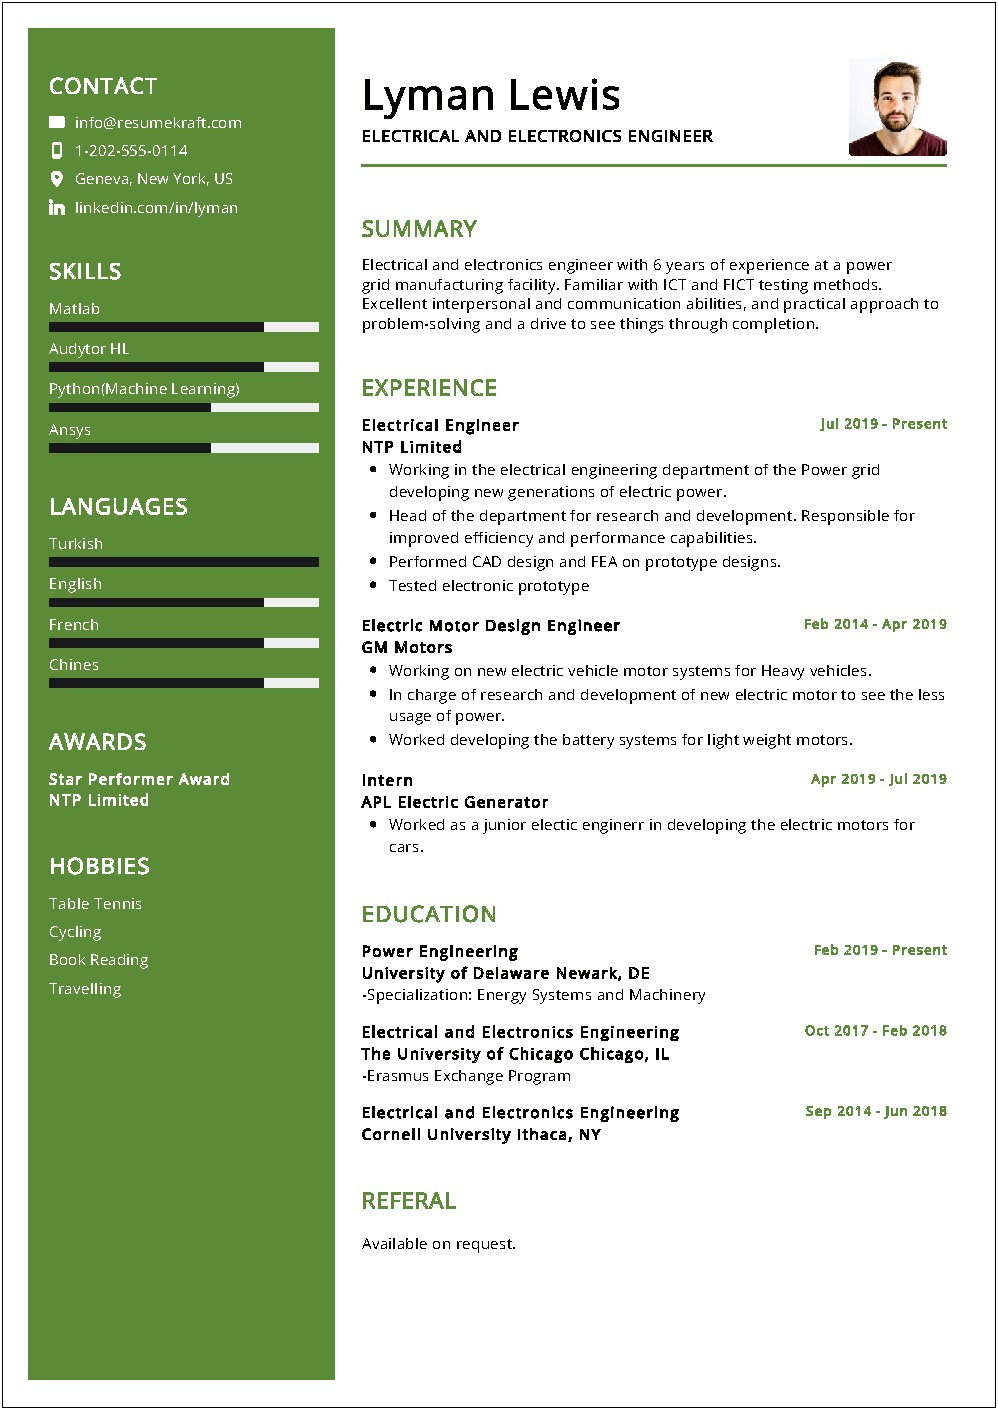 Resume Objective For Experienced Electrical Engineer